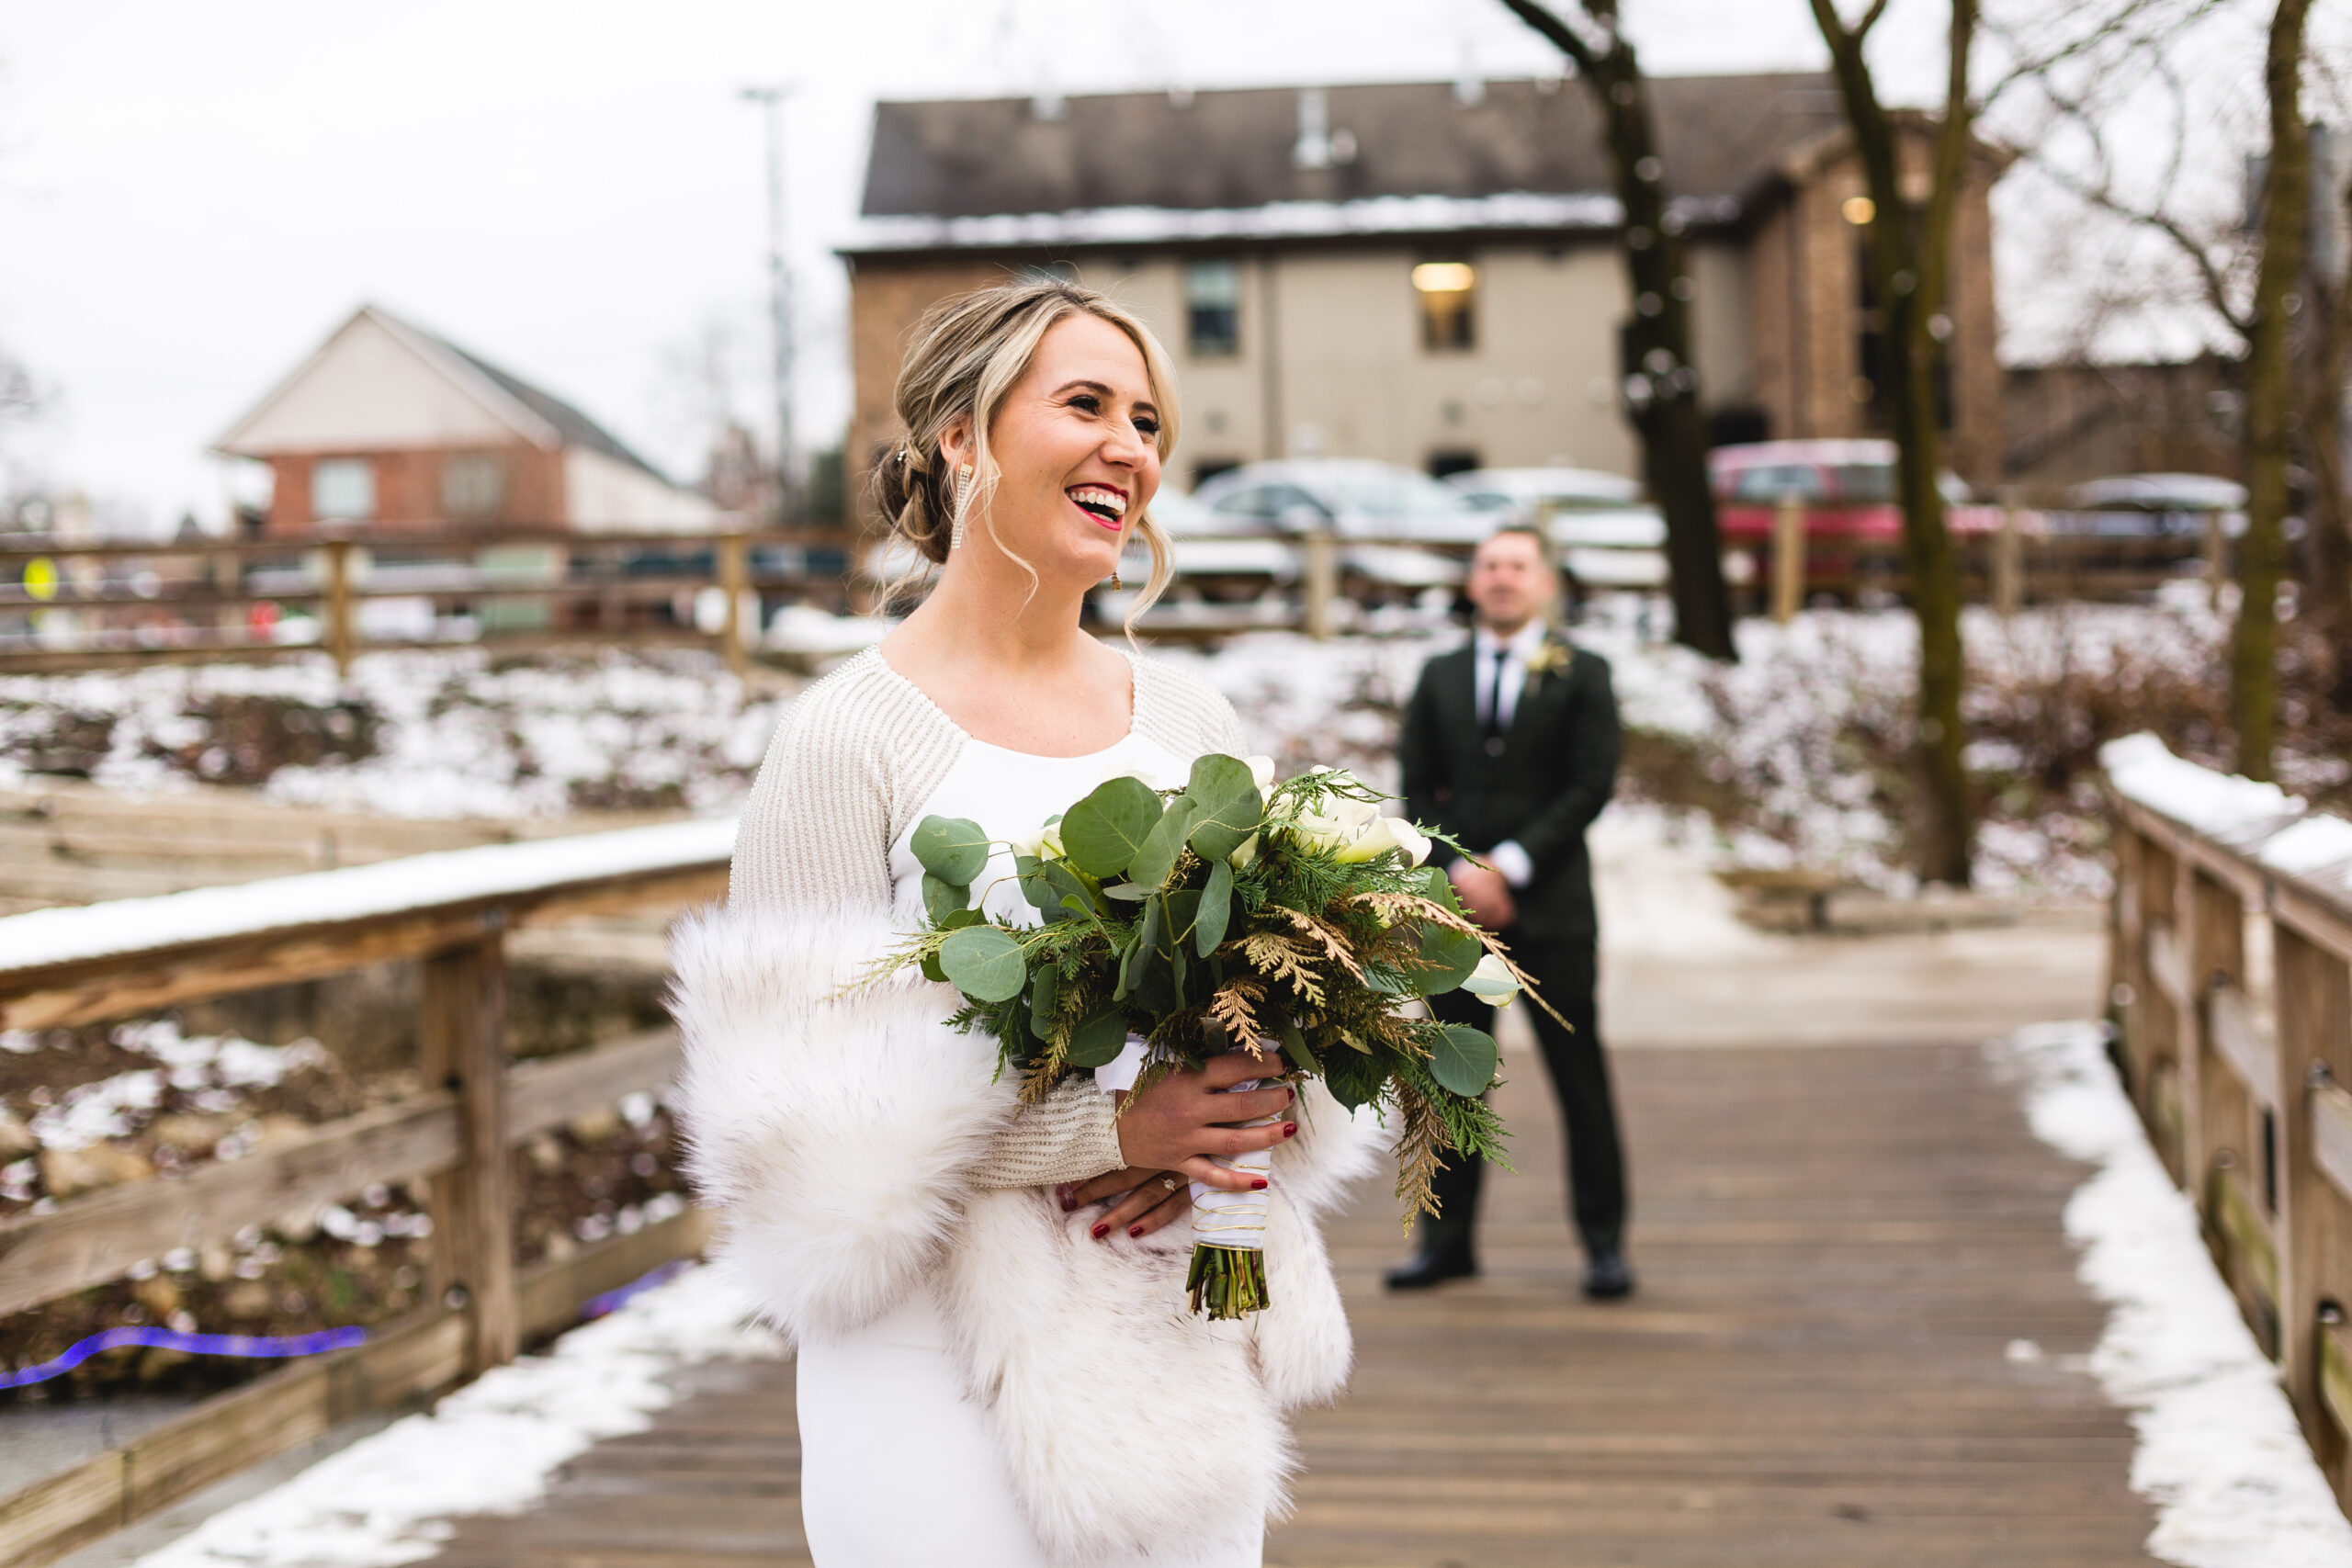 Bride turns around for first look on her wedding day on a snowy day in a park on a bridge